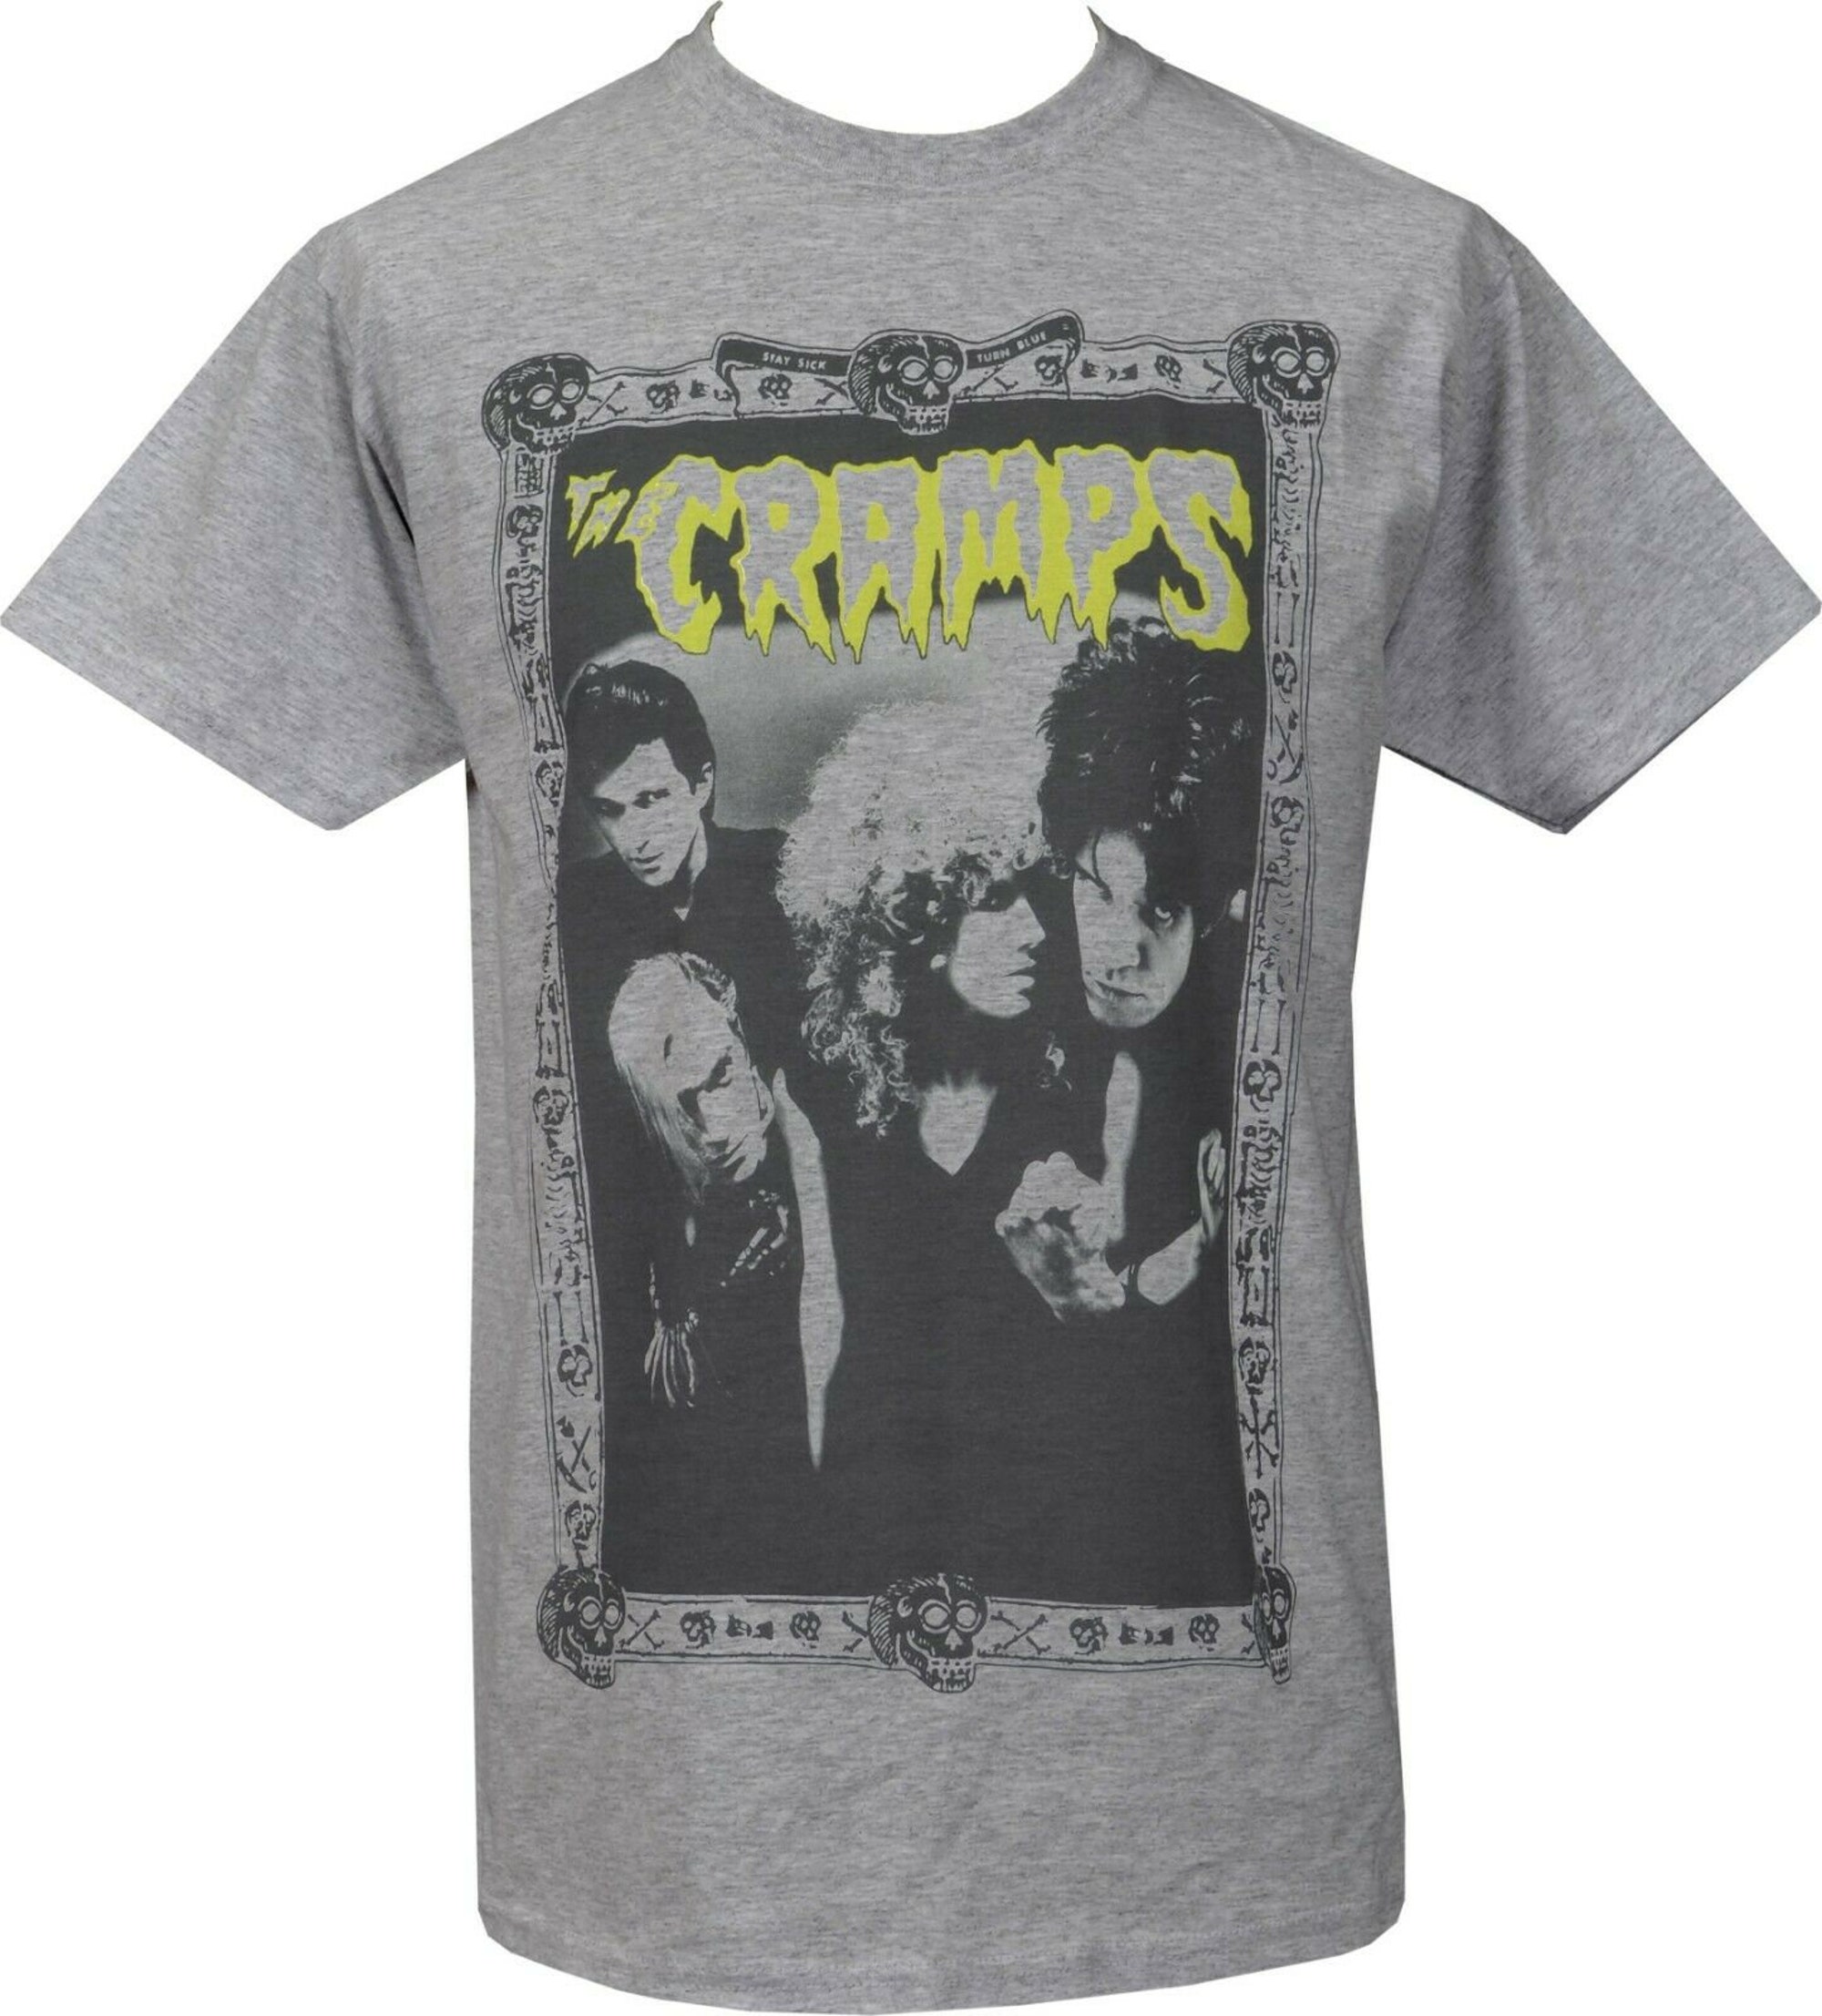 Discover The Cramps Mens Psychobilly T-Shirt Stay Sick De Lux Interior Garage Skull